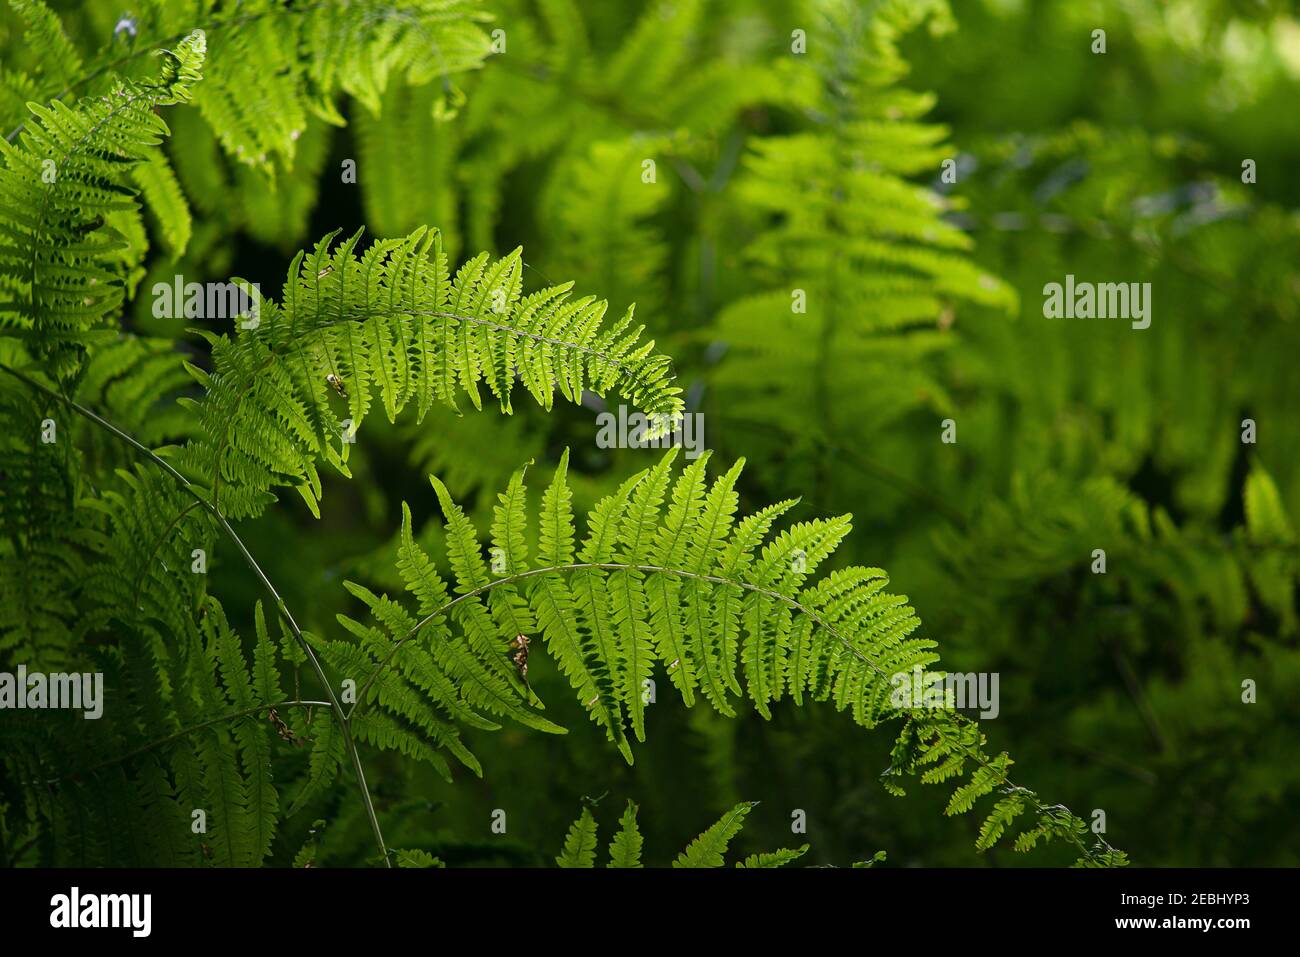 Green fern leafs in a forest with pretty counter light in a full frame pattern Stock Photo